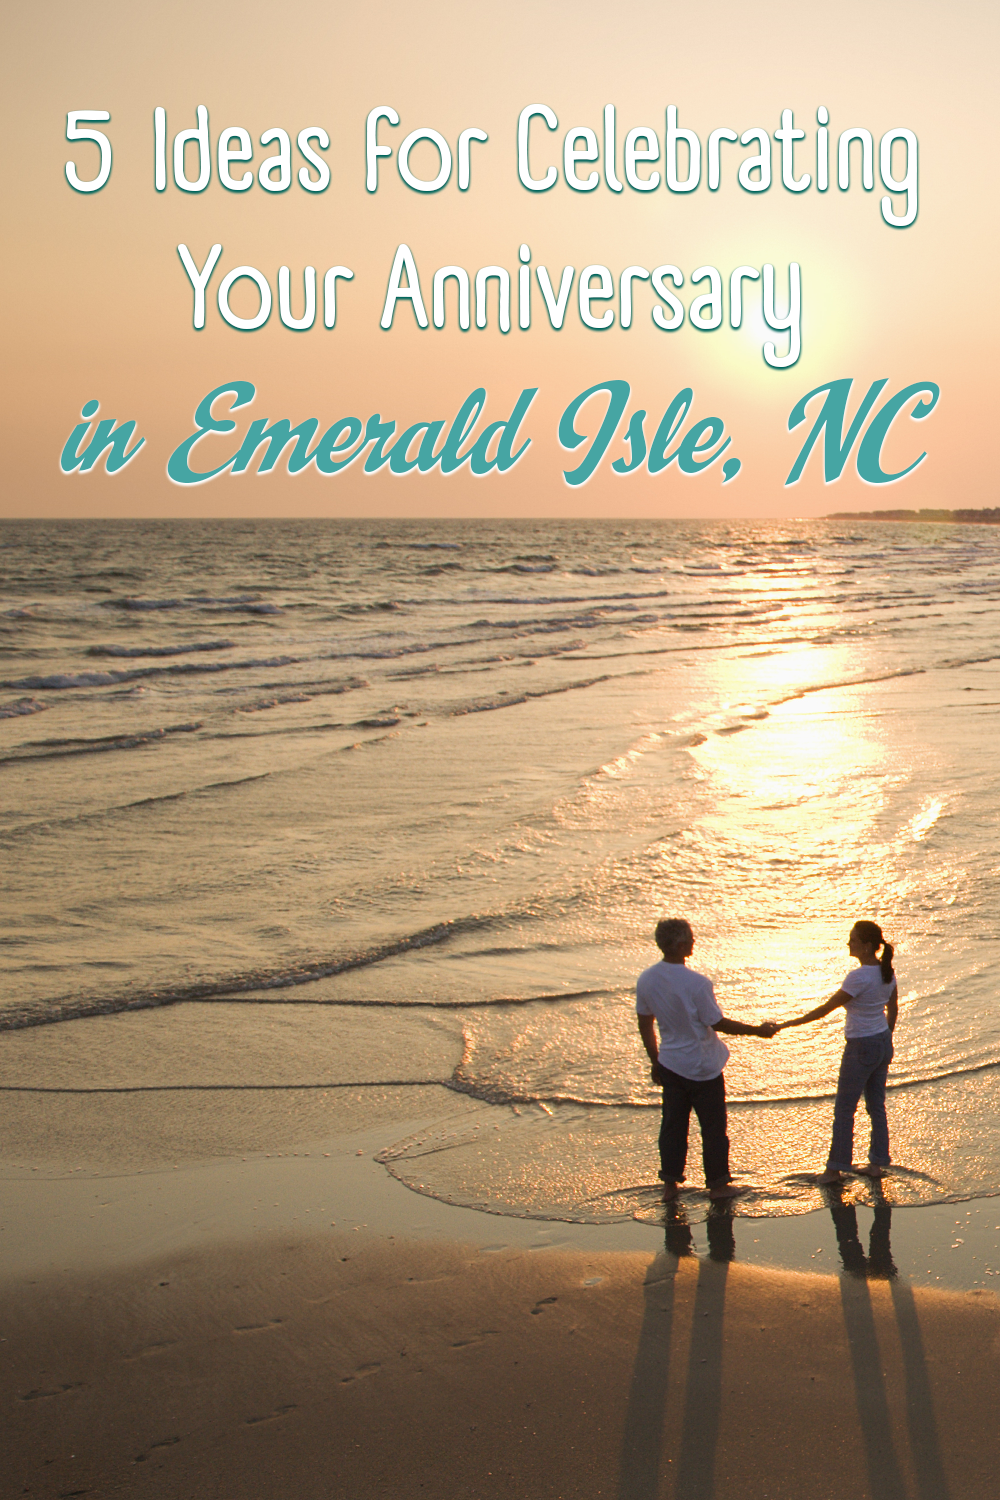 5 Ideas for Celebrating Your Anniversary in Emerald Isle